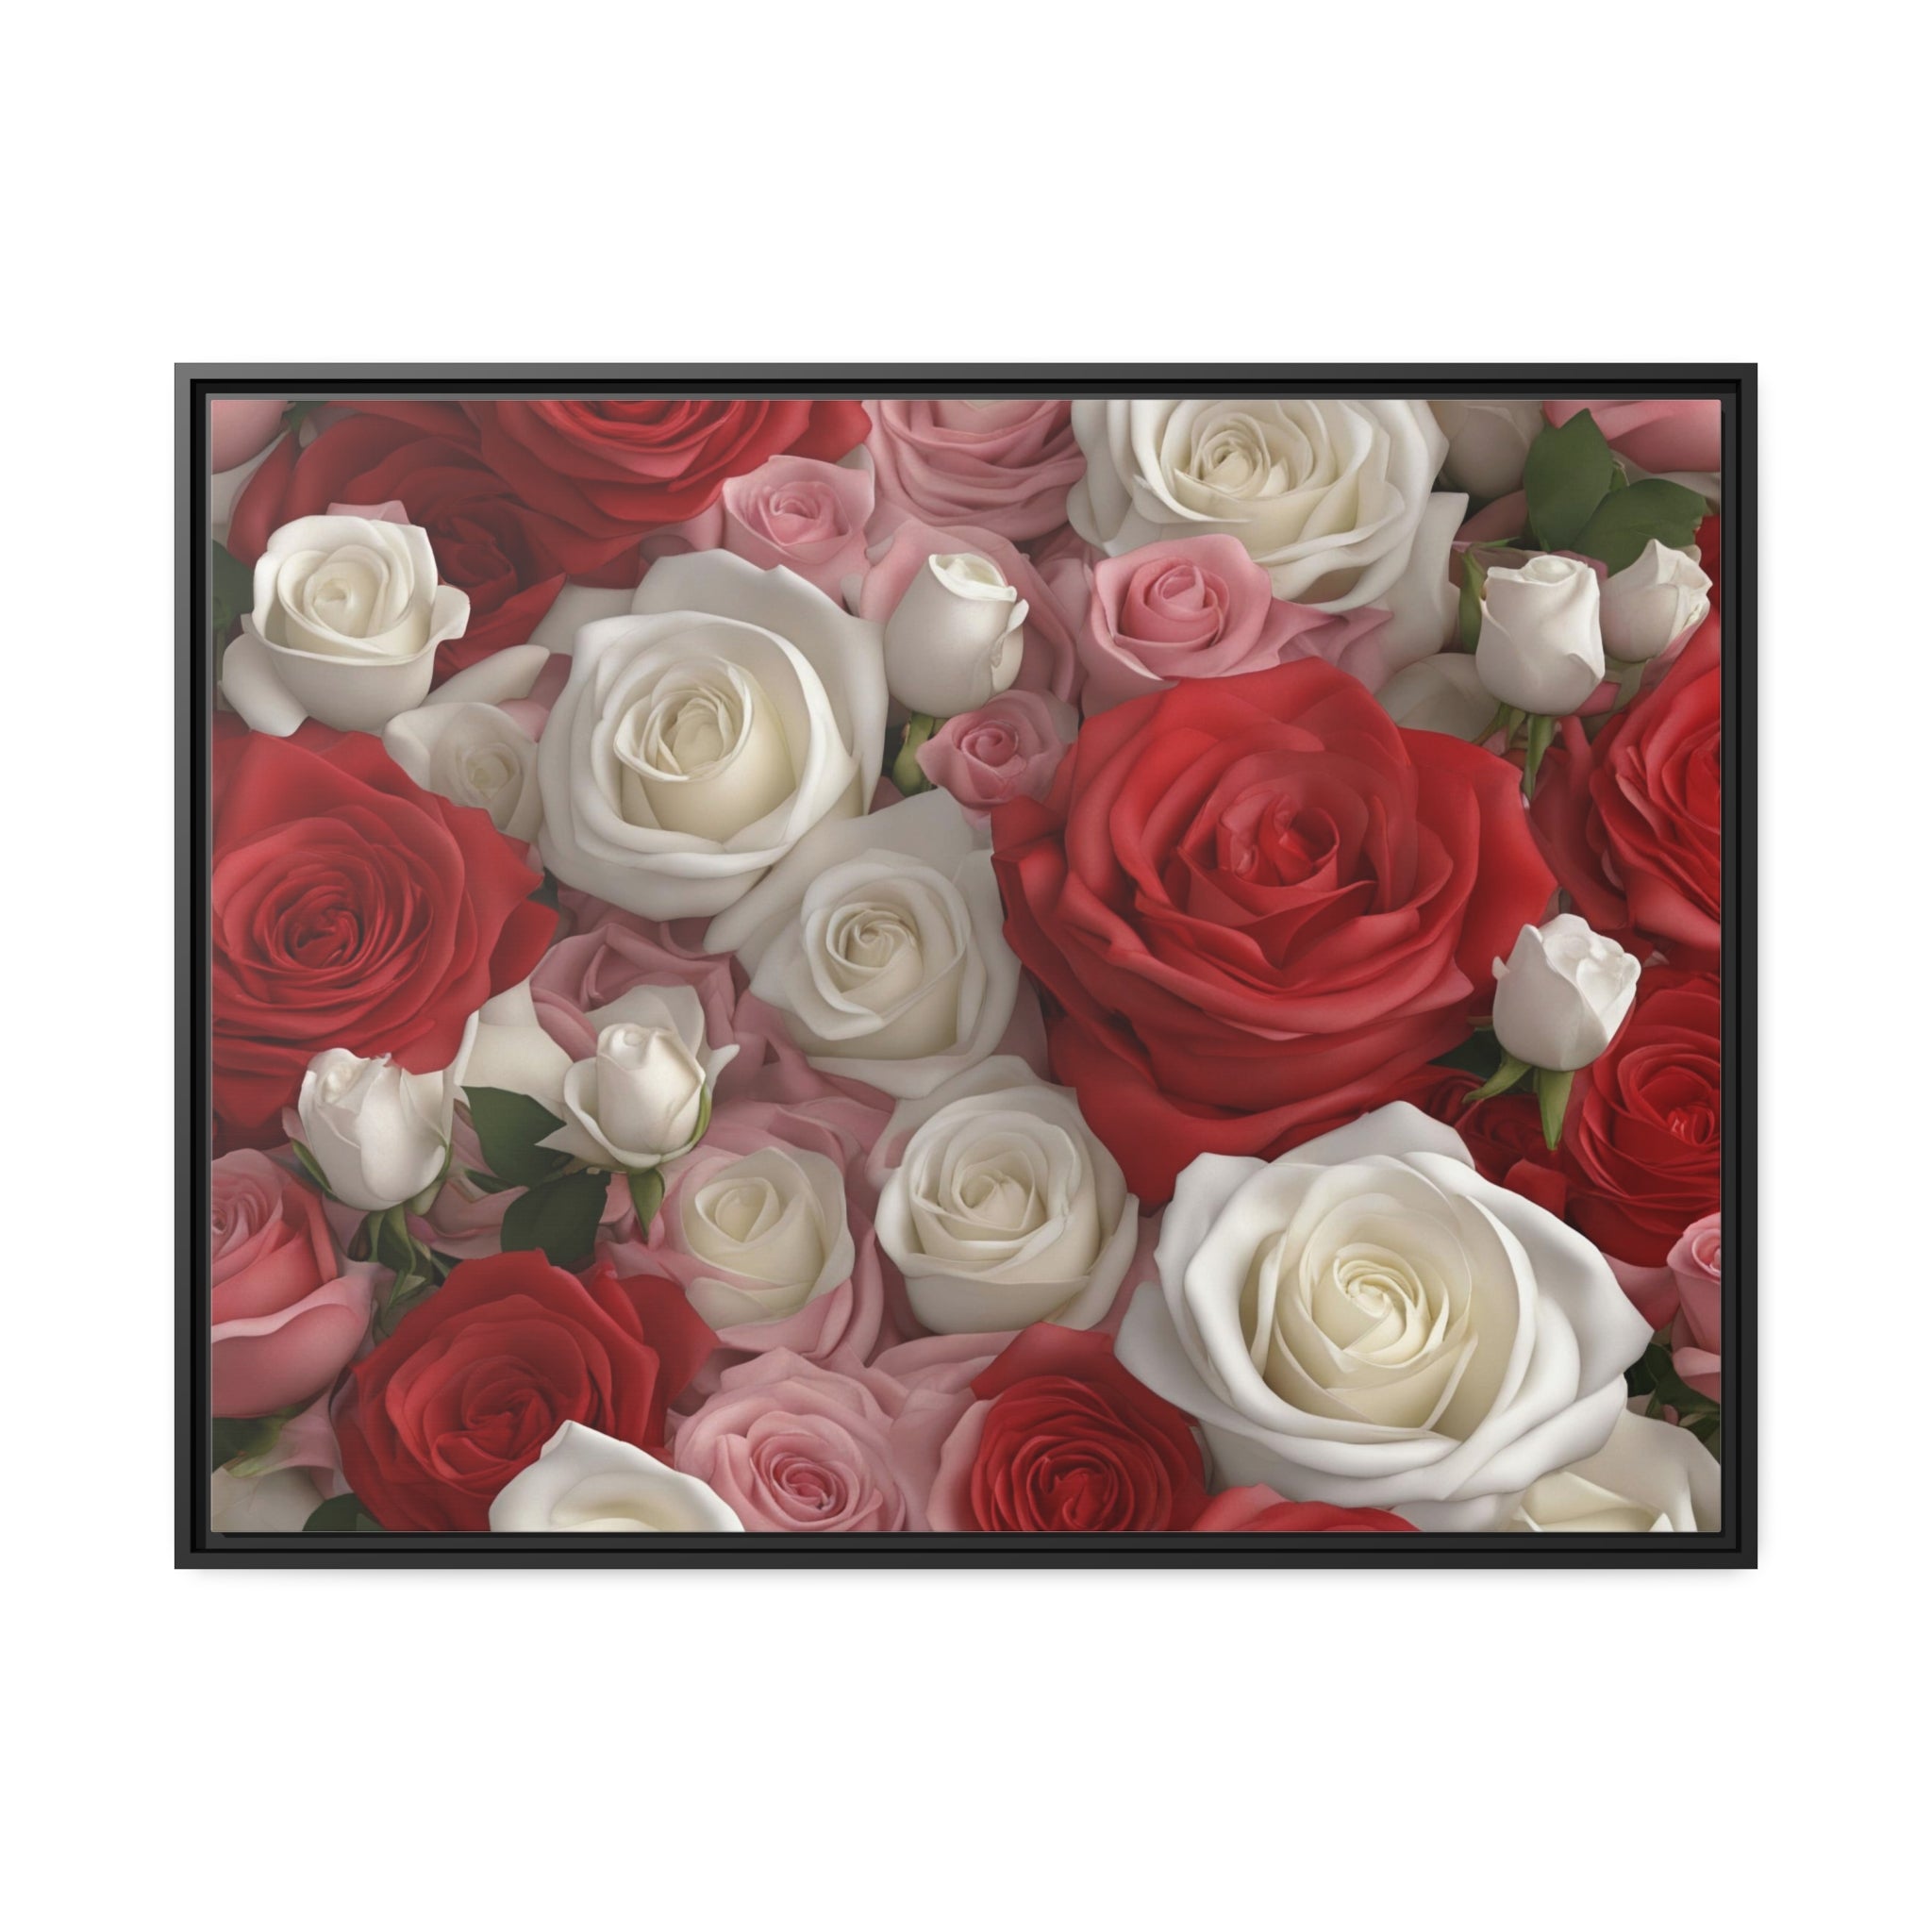 Wall Art ROSES Canvas Print Art Deco Painting Original Giclee 40X30 + Frame Love Flower Minimalist Beauty Fun Design Fit House Home Office Gift Ready Hang